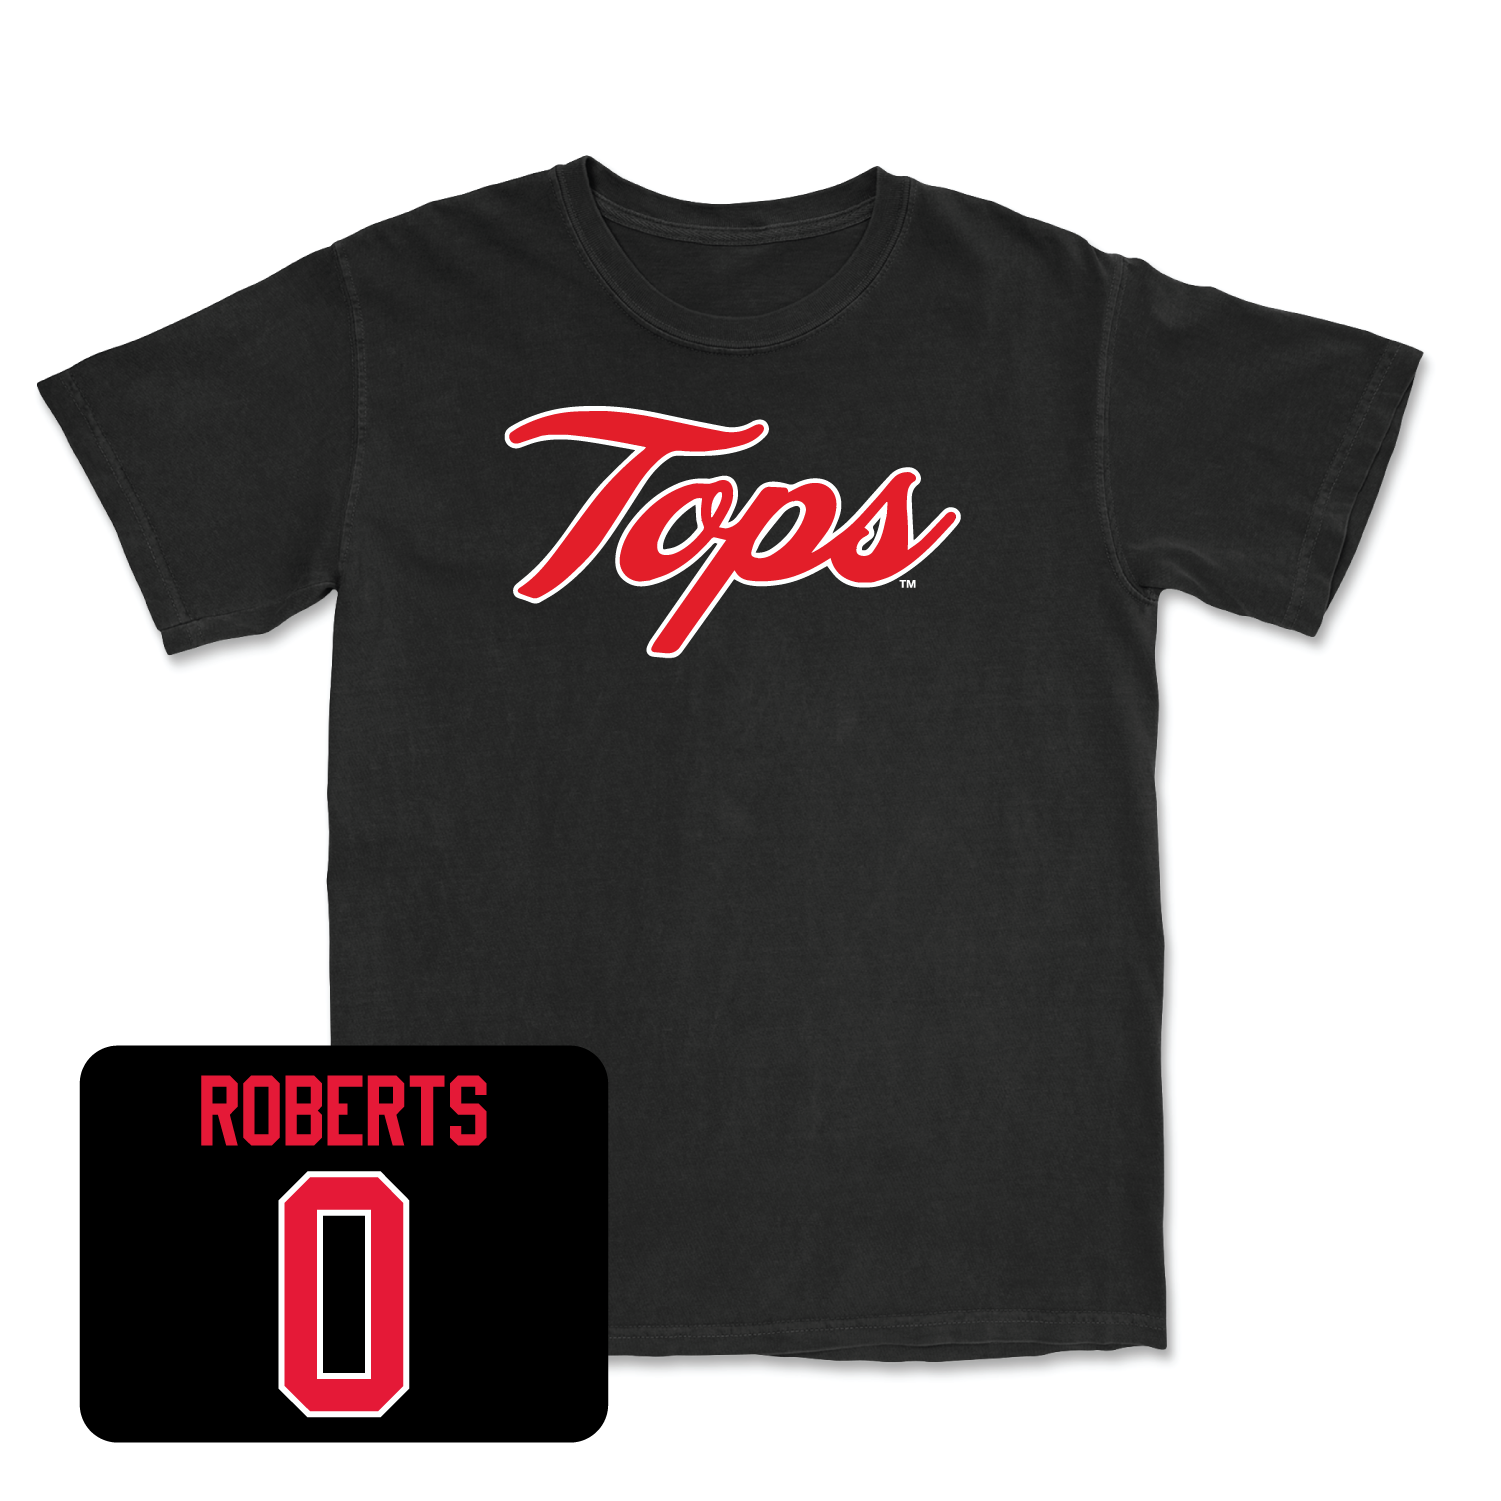 Black Women's Soccer Tops Tee 2 Youth Large / Mia Roberts | #0